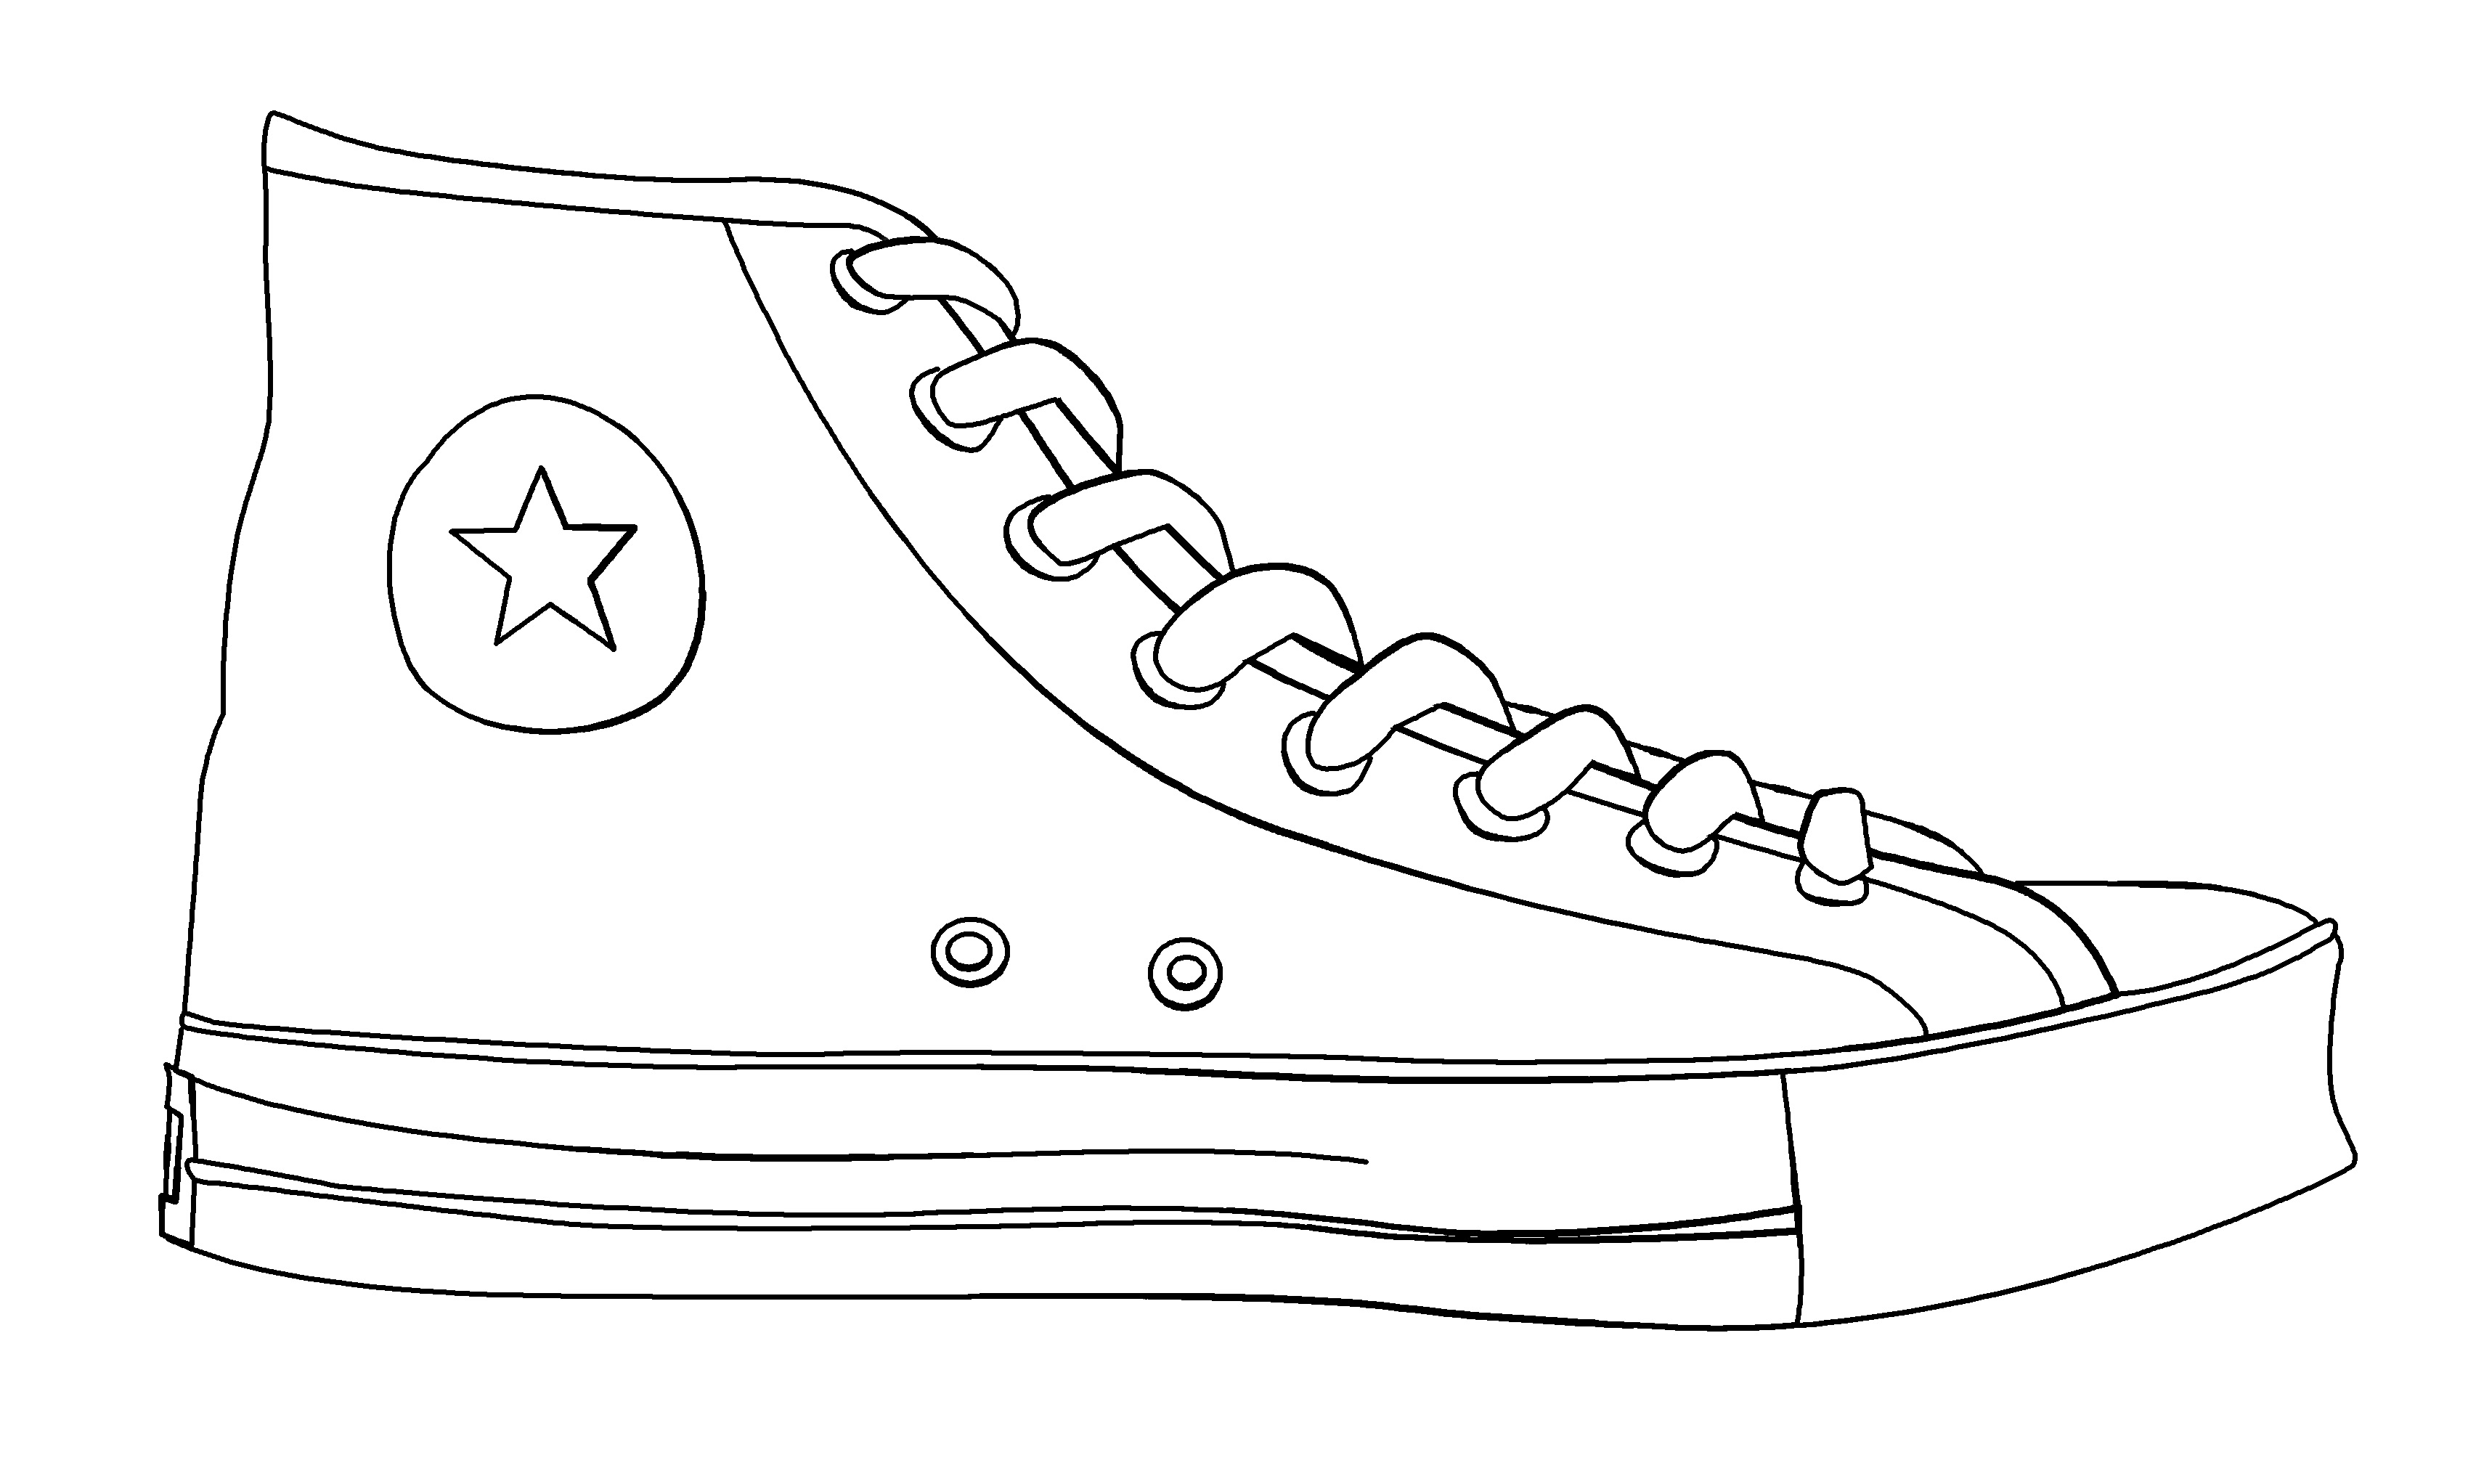 Free Outline Of Shoe, Download Free Outline Of Shoe png images, Free